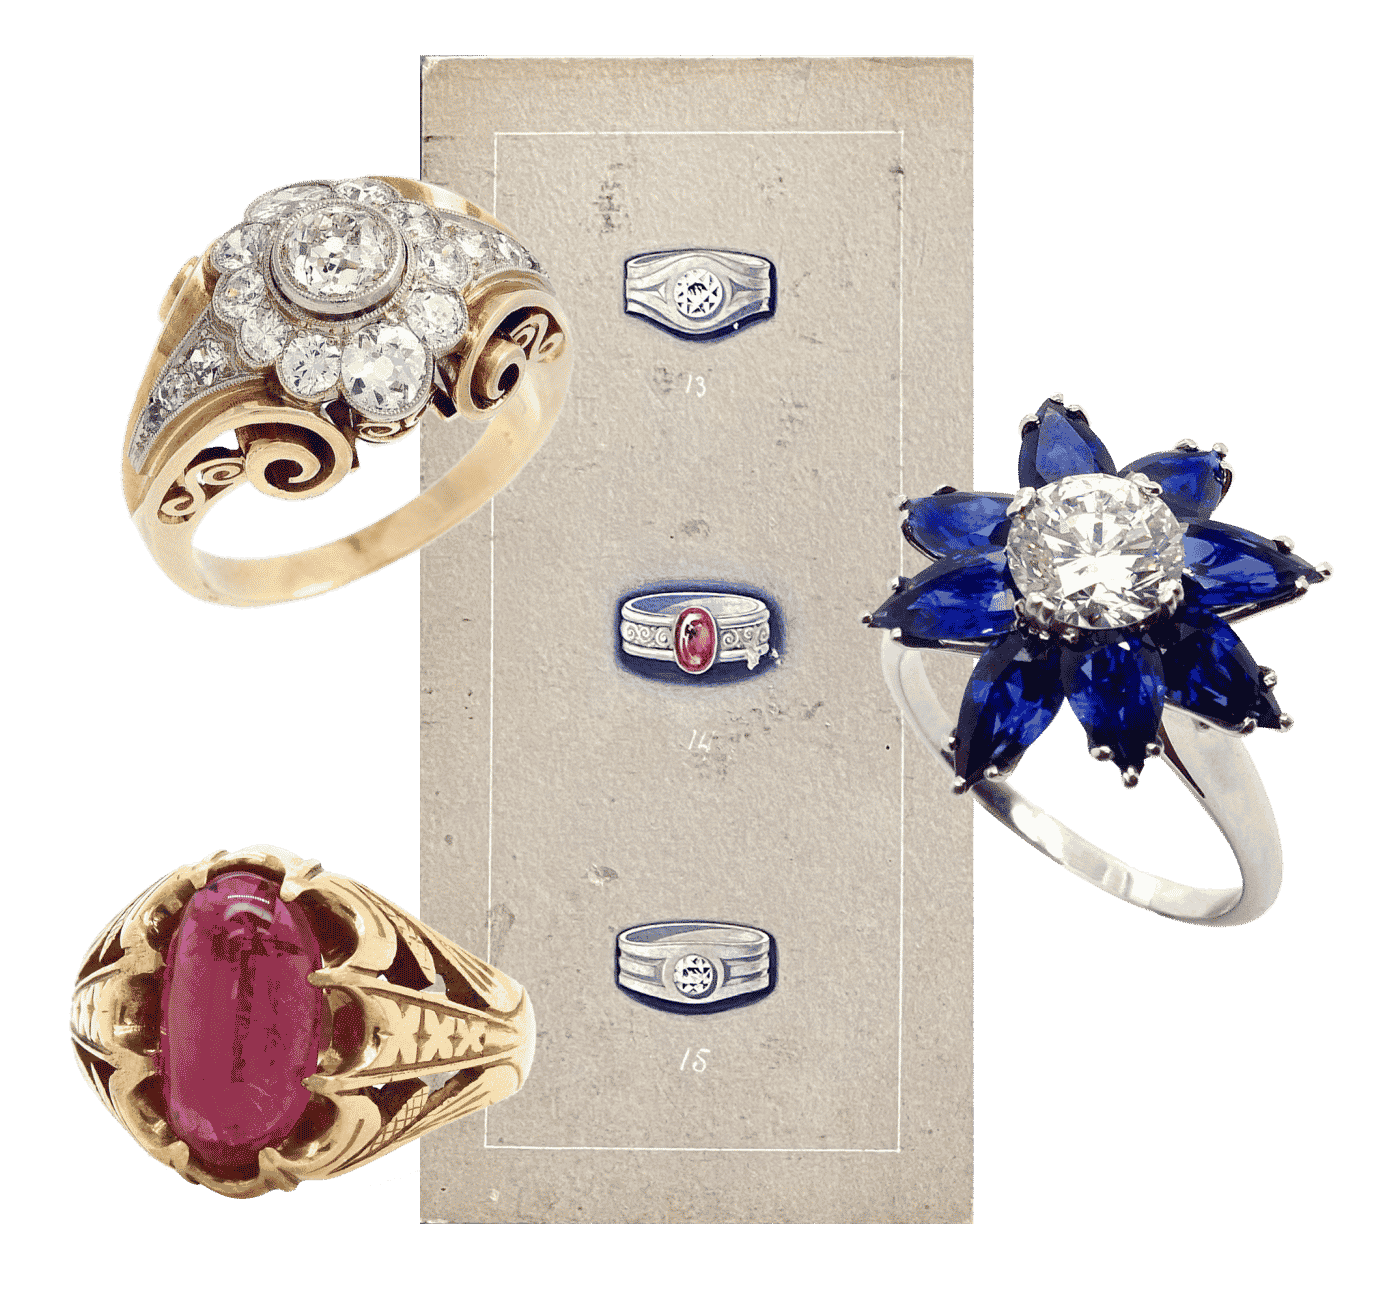 DIAMOND AND GOLD CLUSTER RING, 1940s; DIAMOND AND SAPPHIRE FLOWER COCKTAIL RING BY RENÉ KERN, 1980s; BURMESE STAR RUBY CABOCHON SIGNET RING, 1860s; the drawings depict three rings designed for a clients engagement with old cut diamonds and natural Burma Mogok ruby